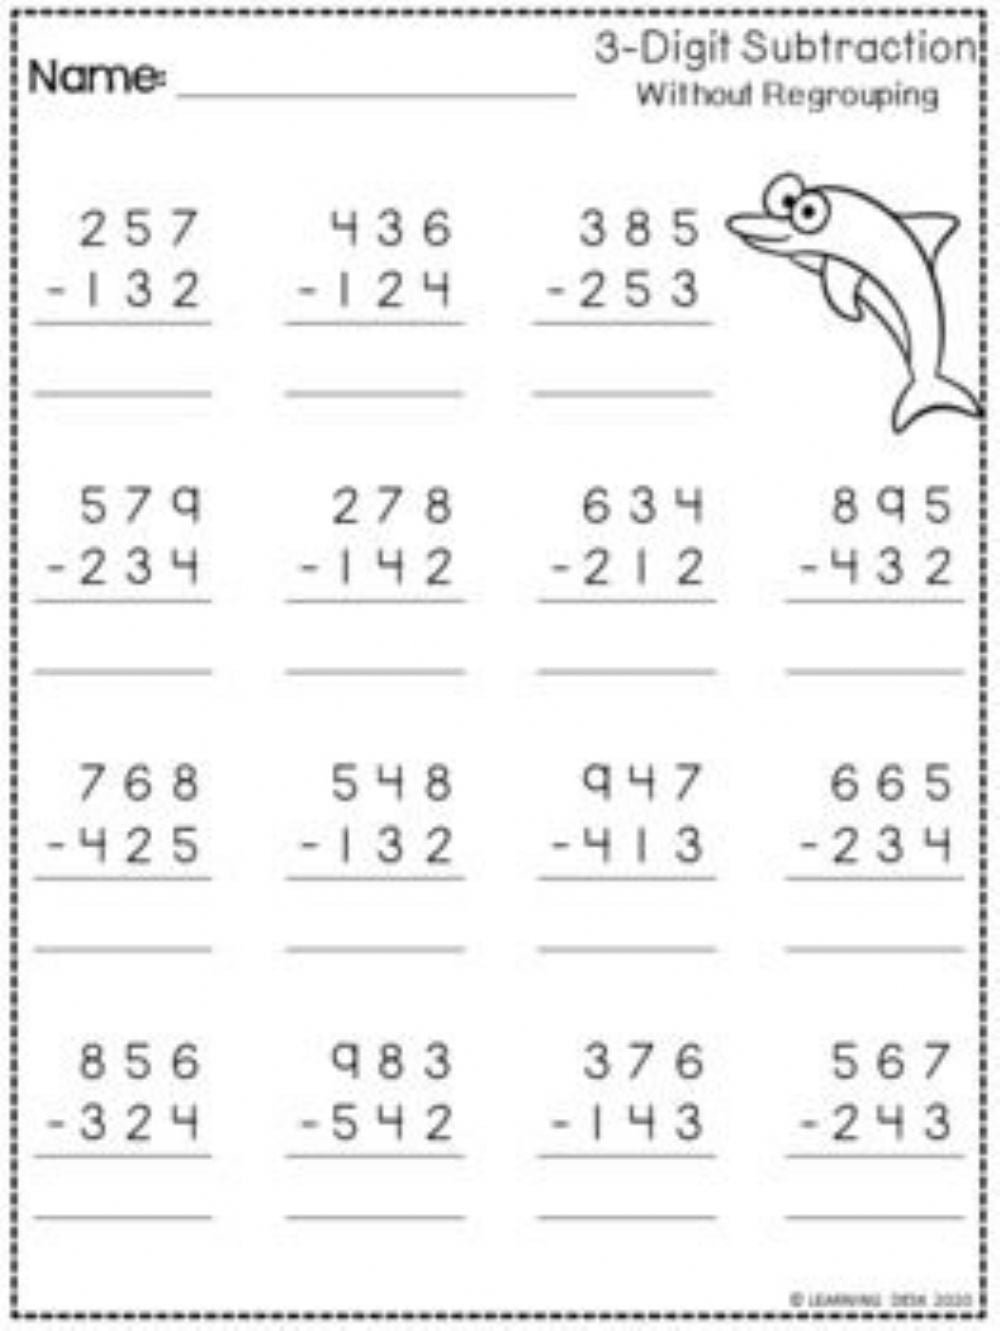 Subtraction Of Whole Numbers Without Regrouping Worksheets